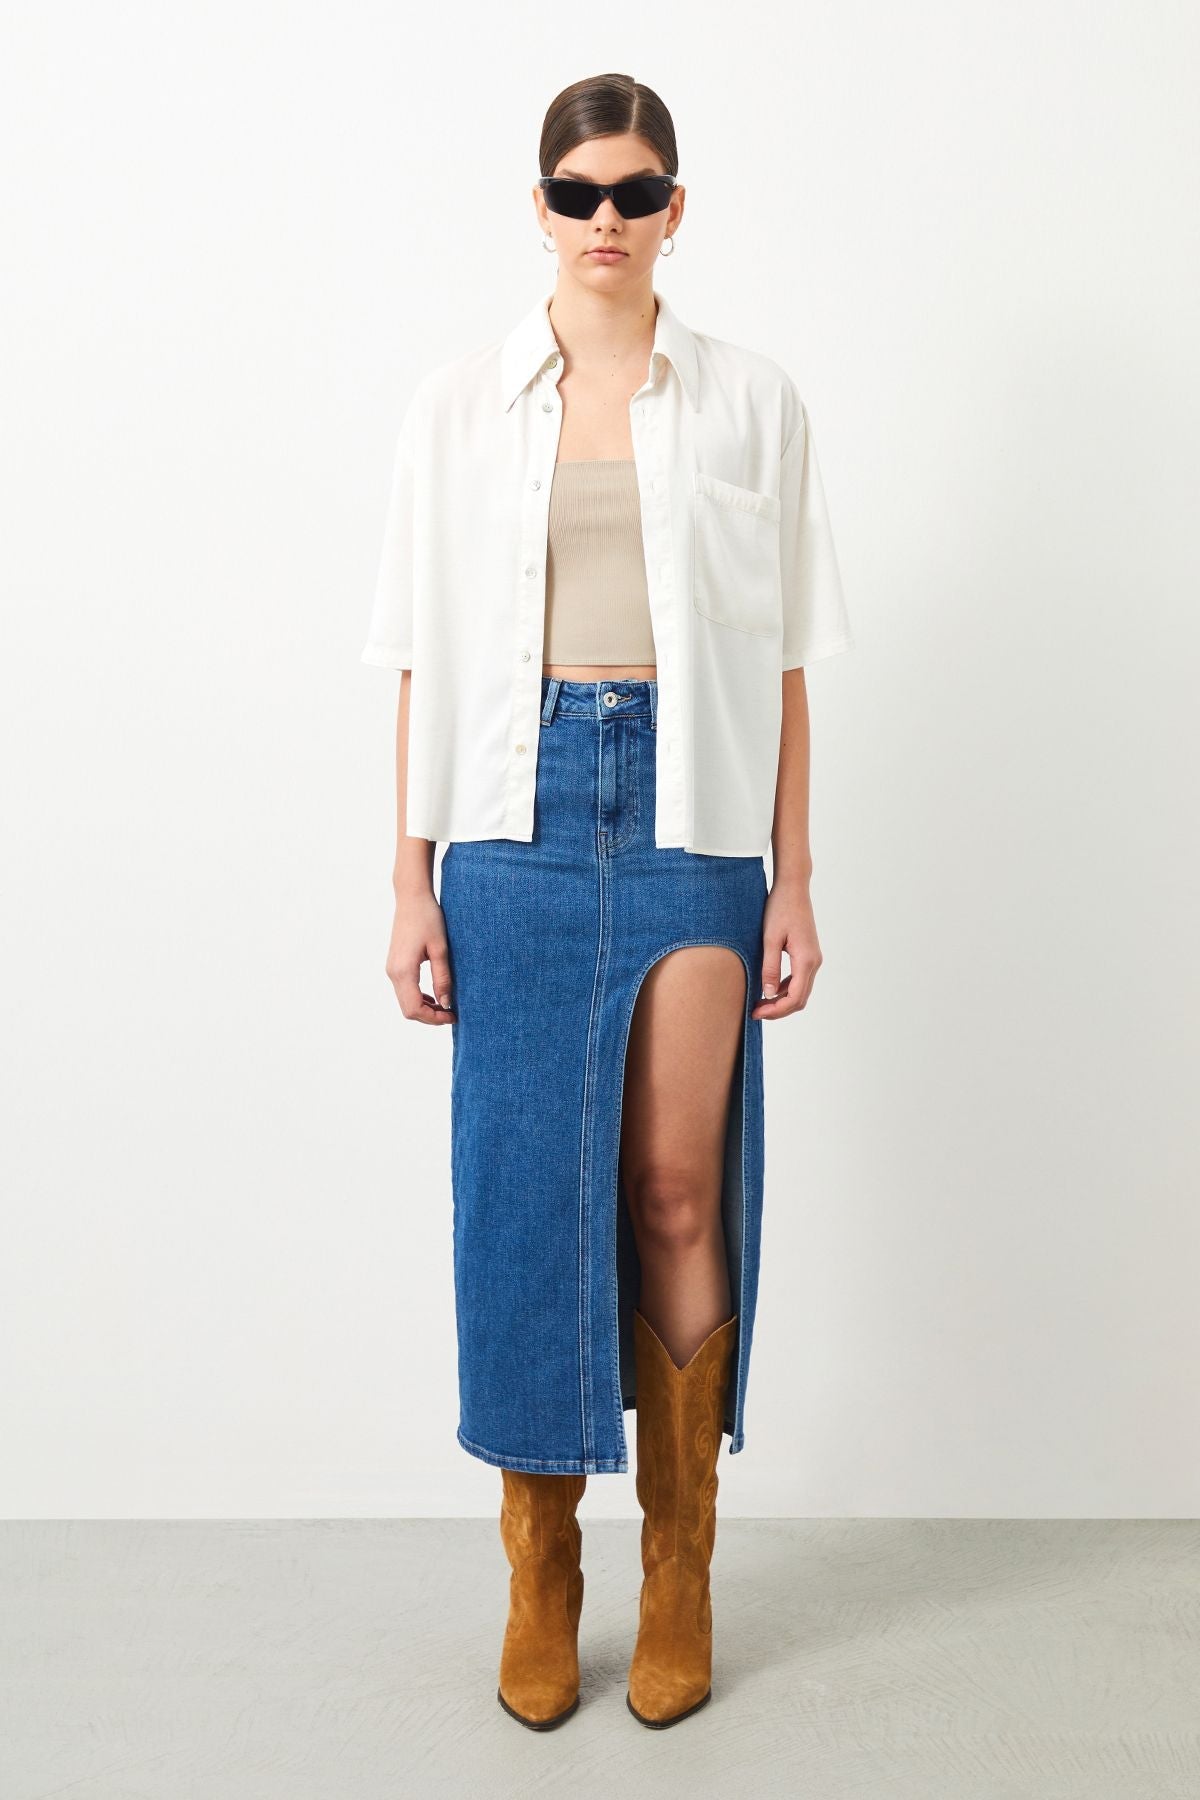 Stylish outfit combining ecru white blouse and blue denim skirt.